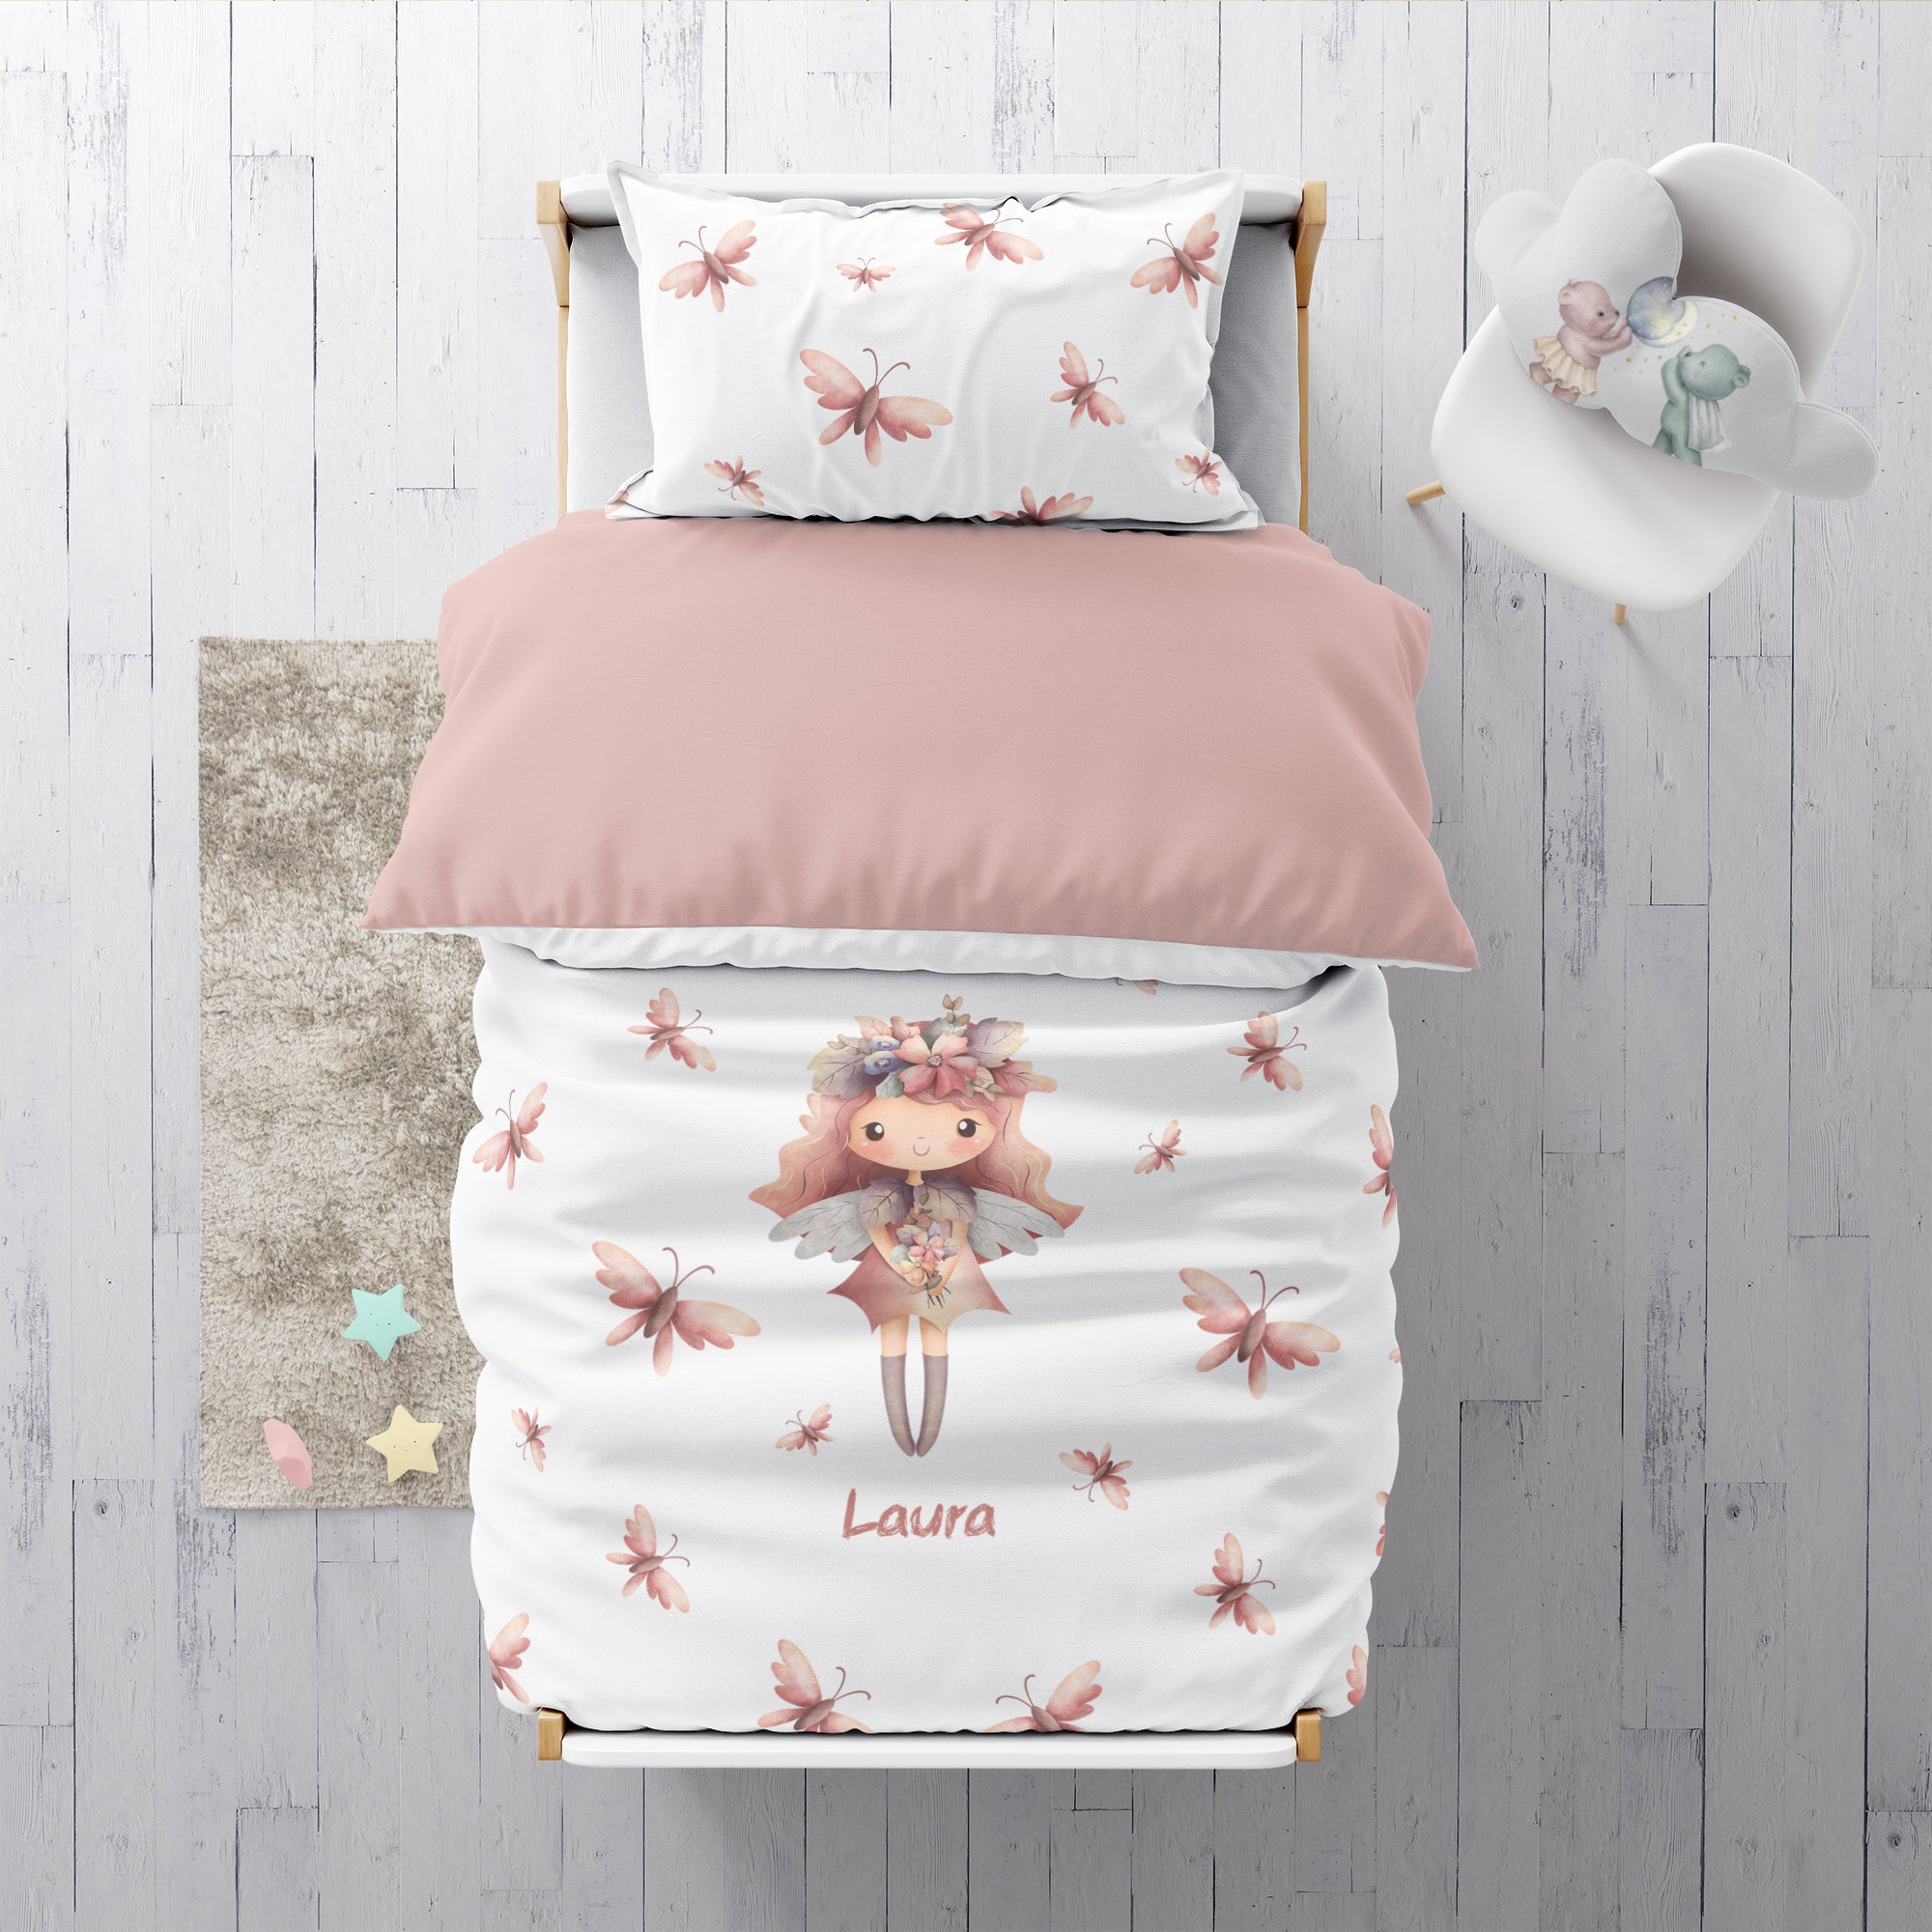 "Fairy" premium bed linen with name